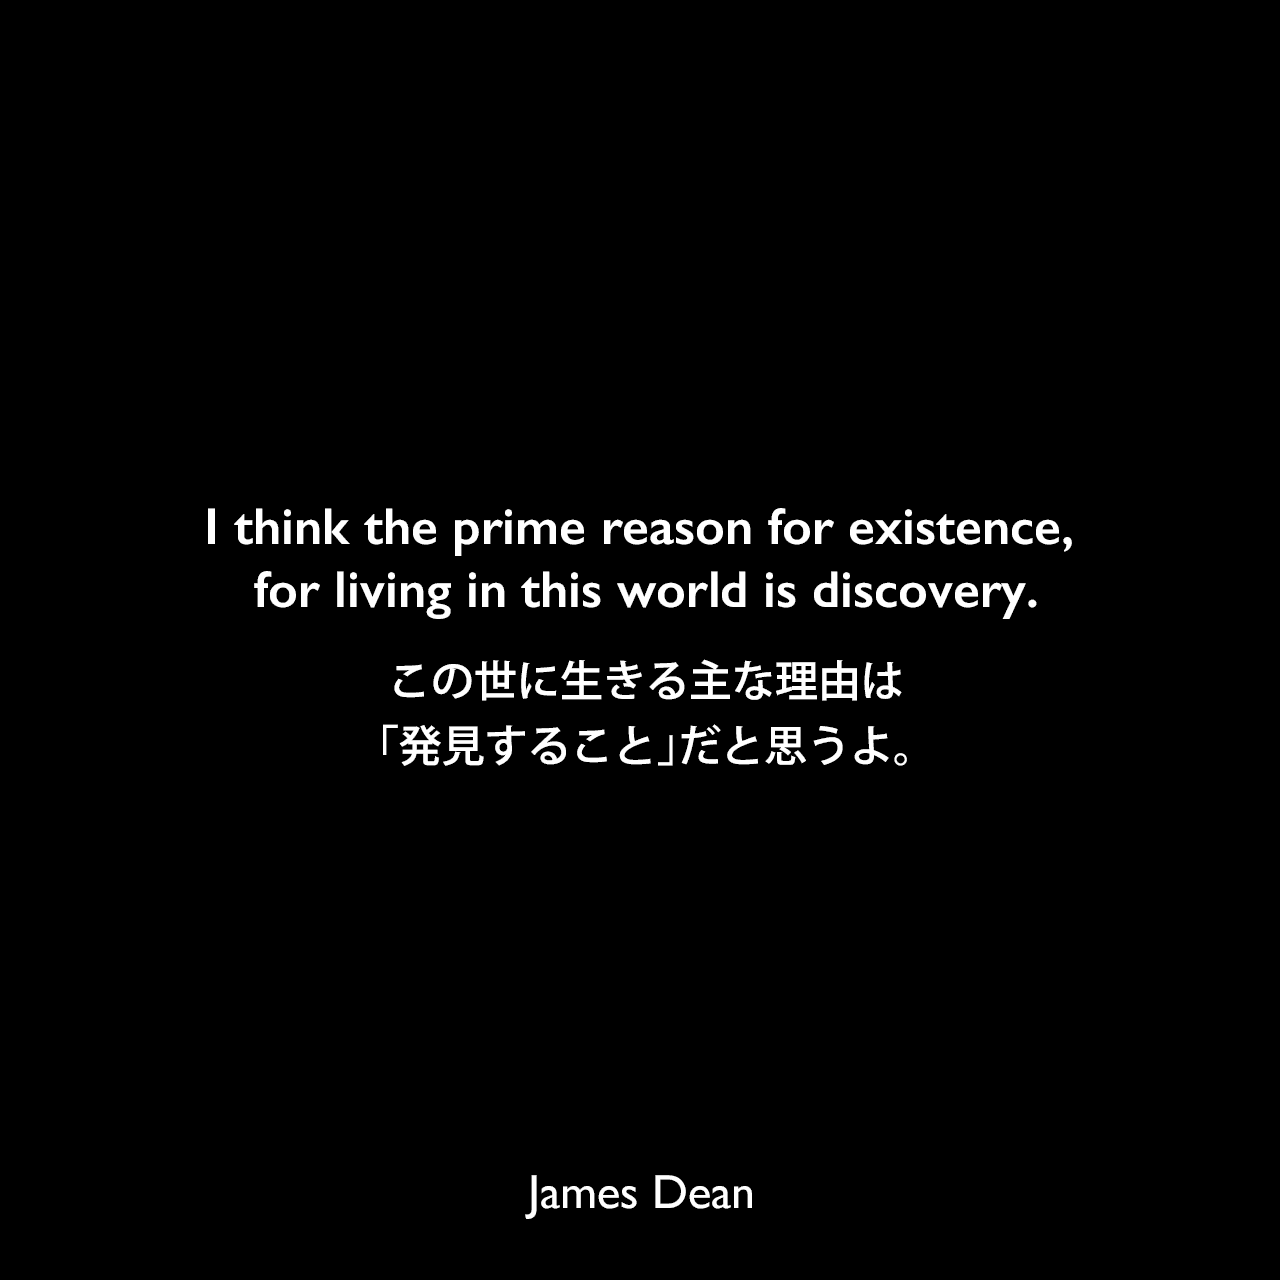 I think the prime reason for existence, for living in this world is discovery.この世に生きる主な理由は、「発見すること」だと思うよ。